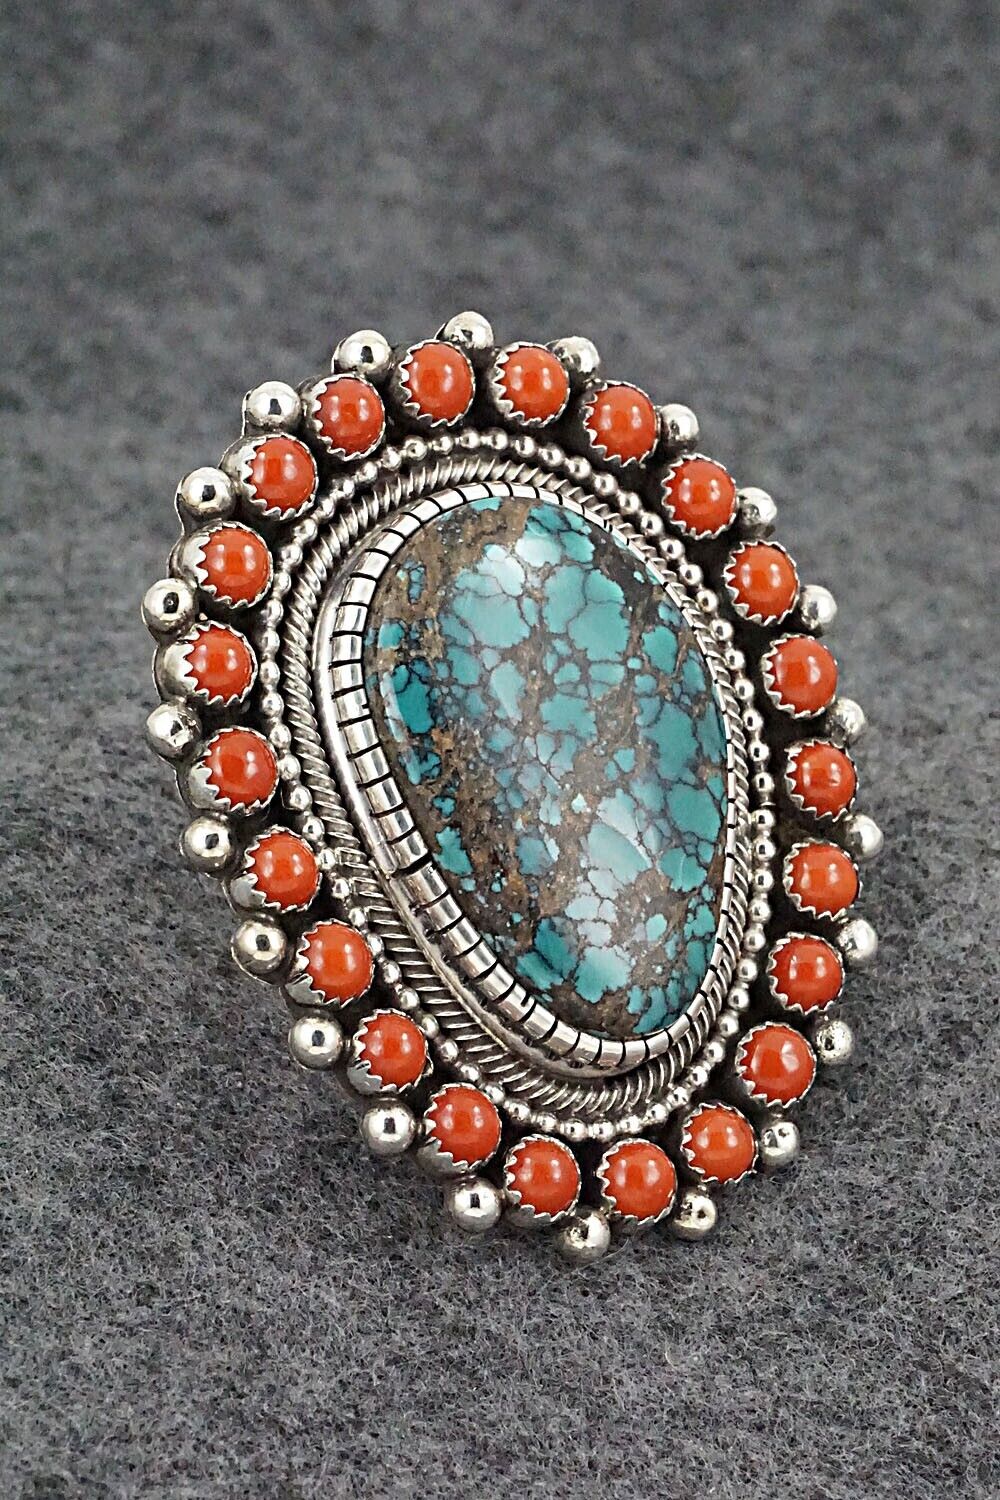 Turquoise, Coral & Sterling Silver Ring - Hemerson Brown - Size 9 Adj.